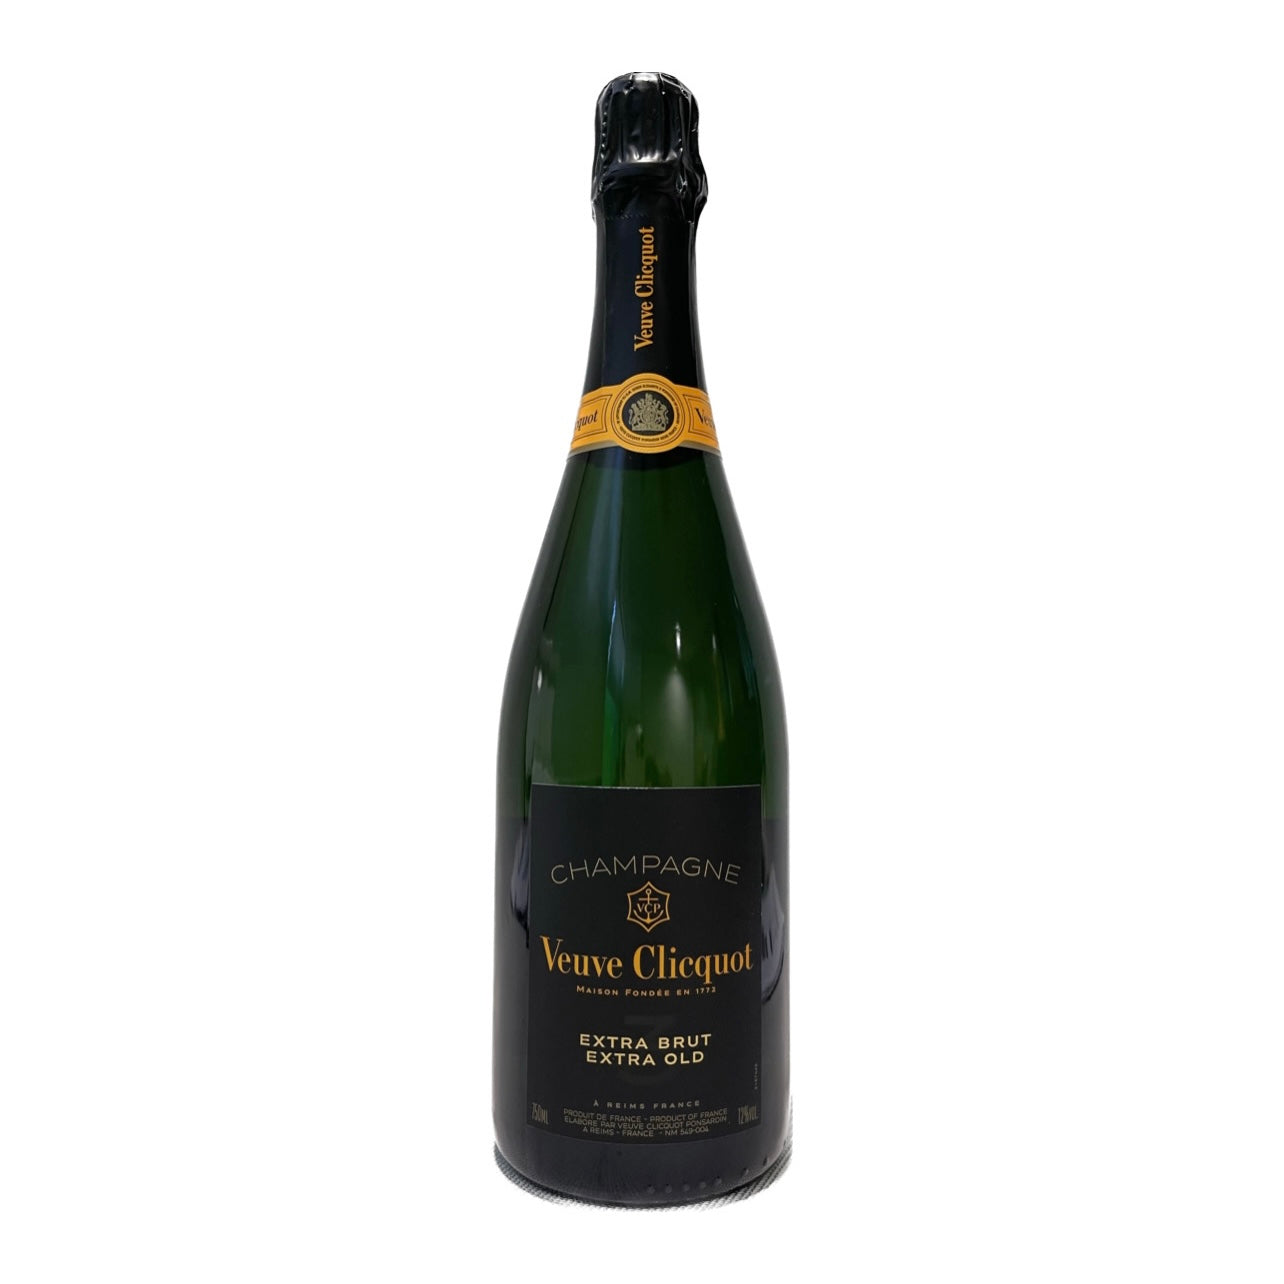 CHAMPAGNE EXTRA BRUT "EXTRA OLD" - VEUVE CLICQUOT